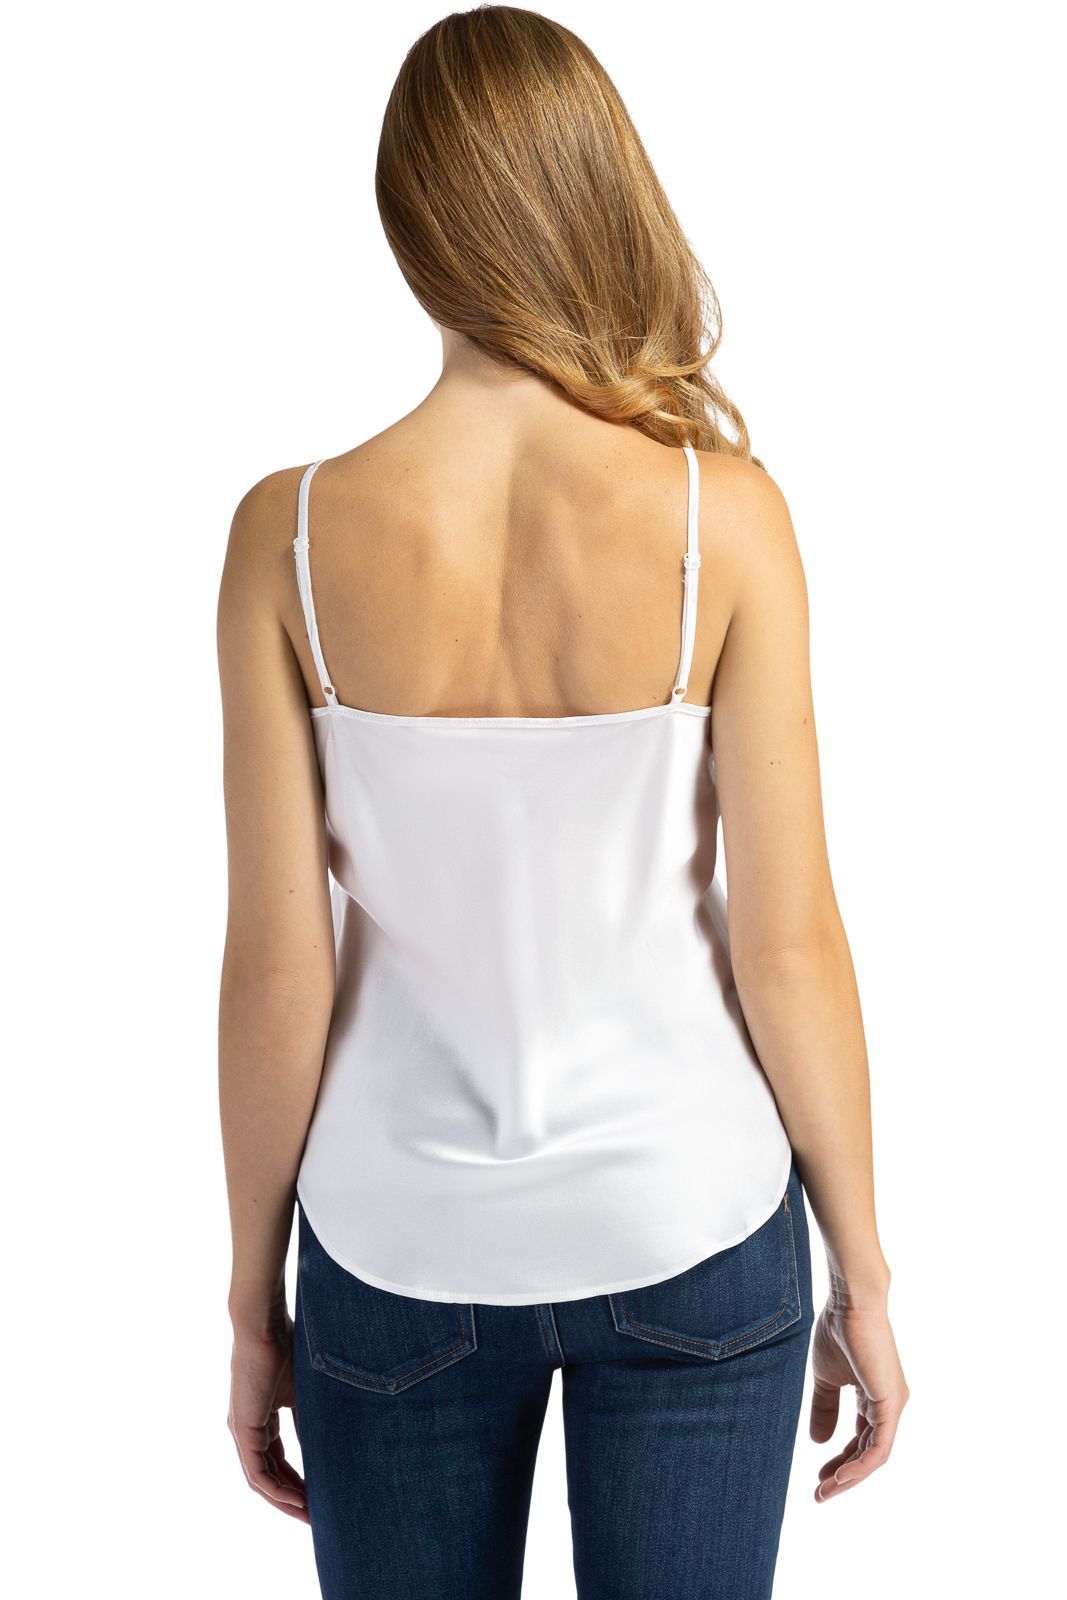 White Knit Stretch Camisole With Thin Straps: Women's Luxury